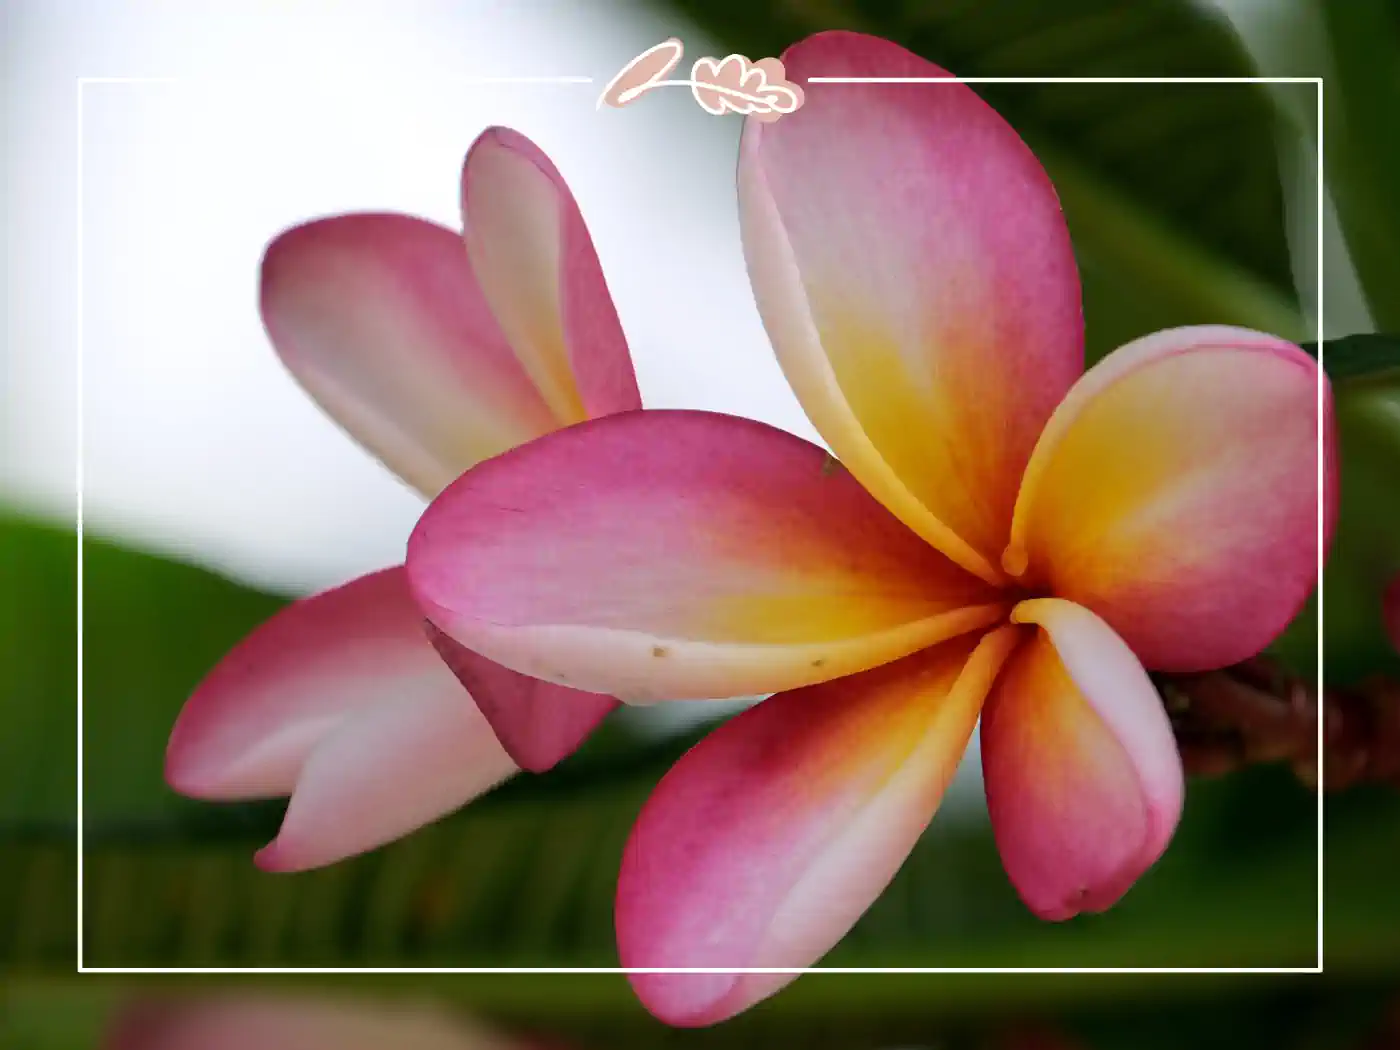 Vibrant pink and yellow plumeria blossoms in full bloom. Fabulous Flowers and Gifts.